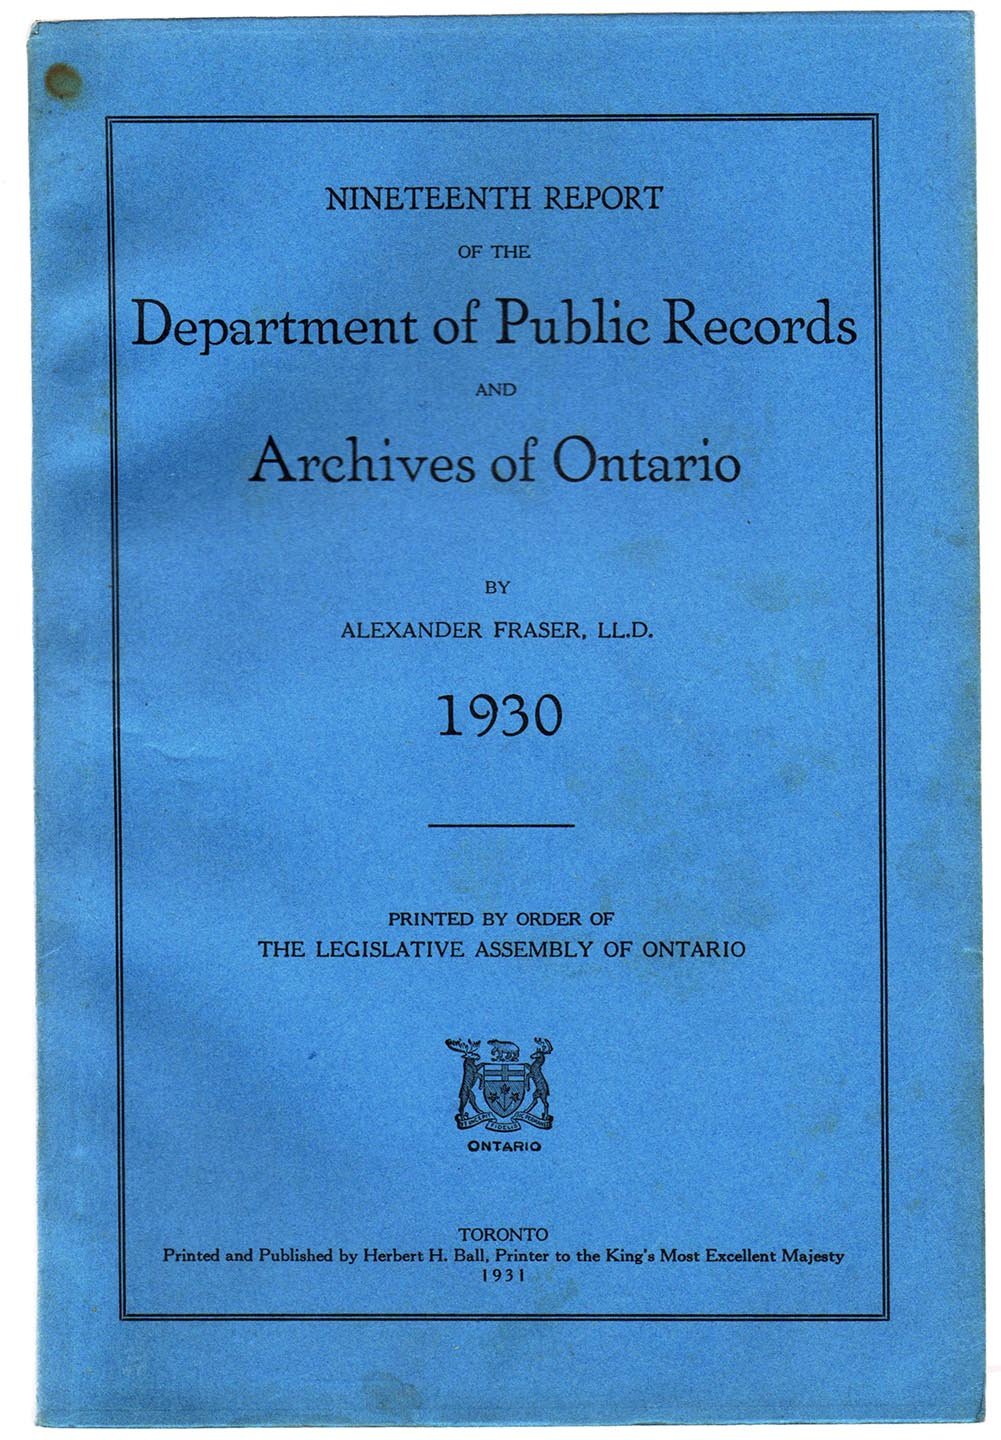 Nineteenth Report of the Department of Public Records and Archives of Ontario, 1930